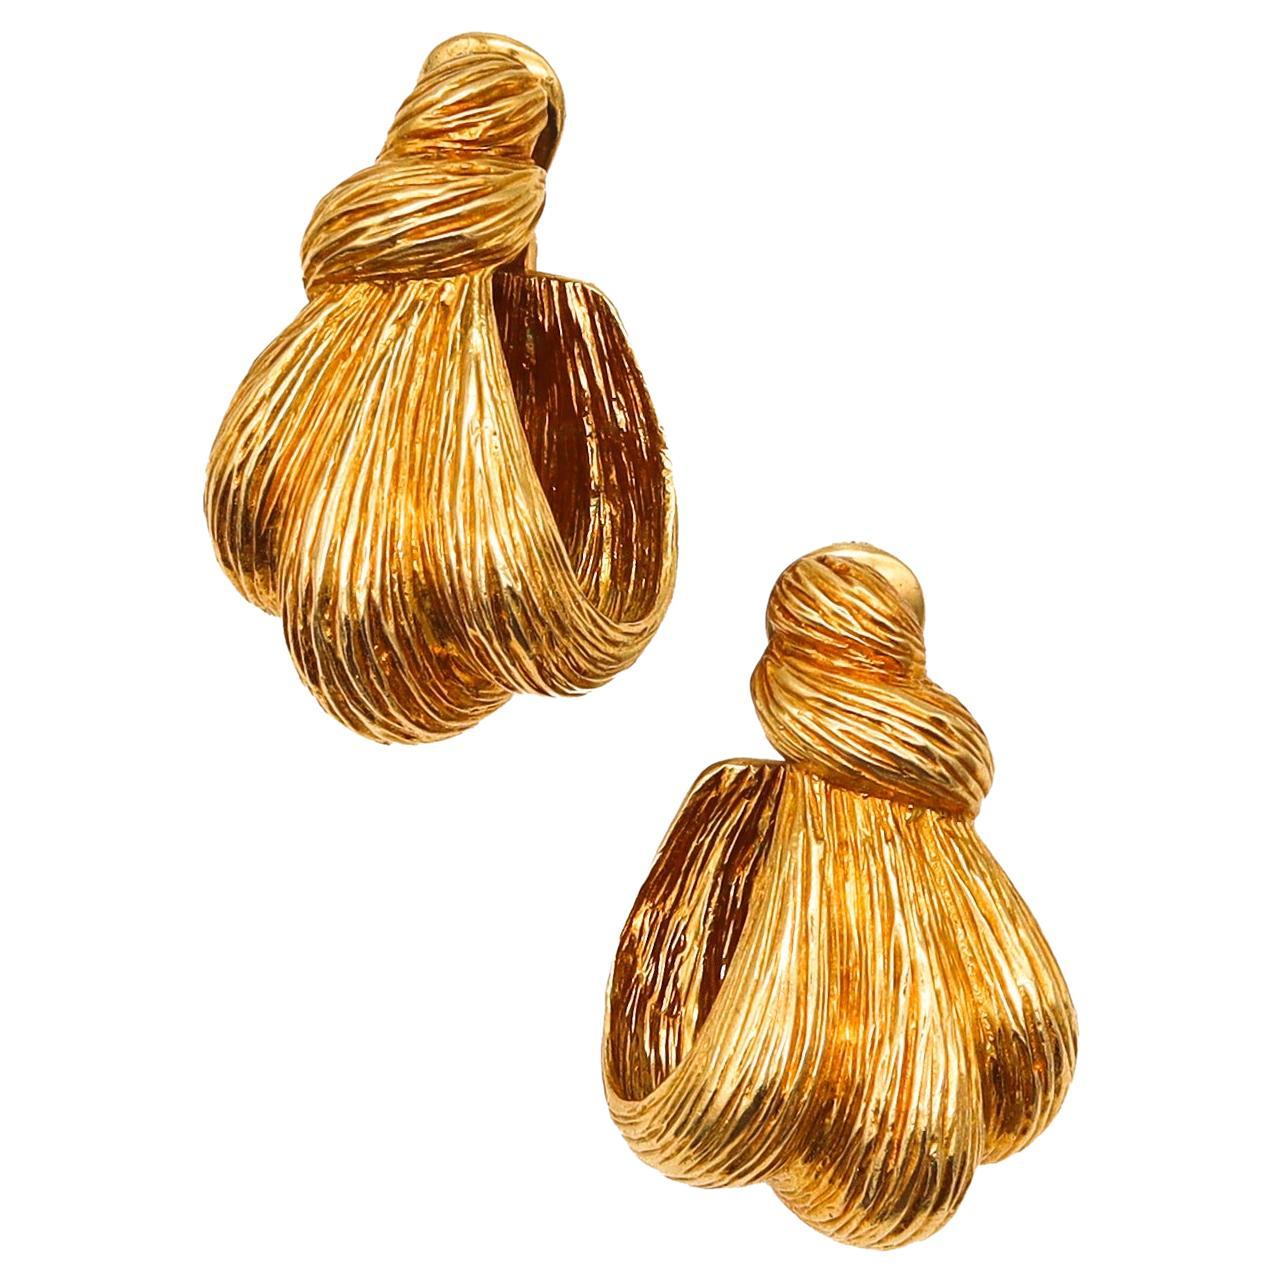 Wander France 1960 Modernist Wrapped Knots Clips Earrings Solid 18Kt Yellow Gold For Sale